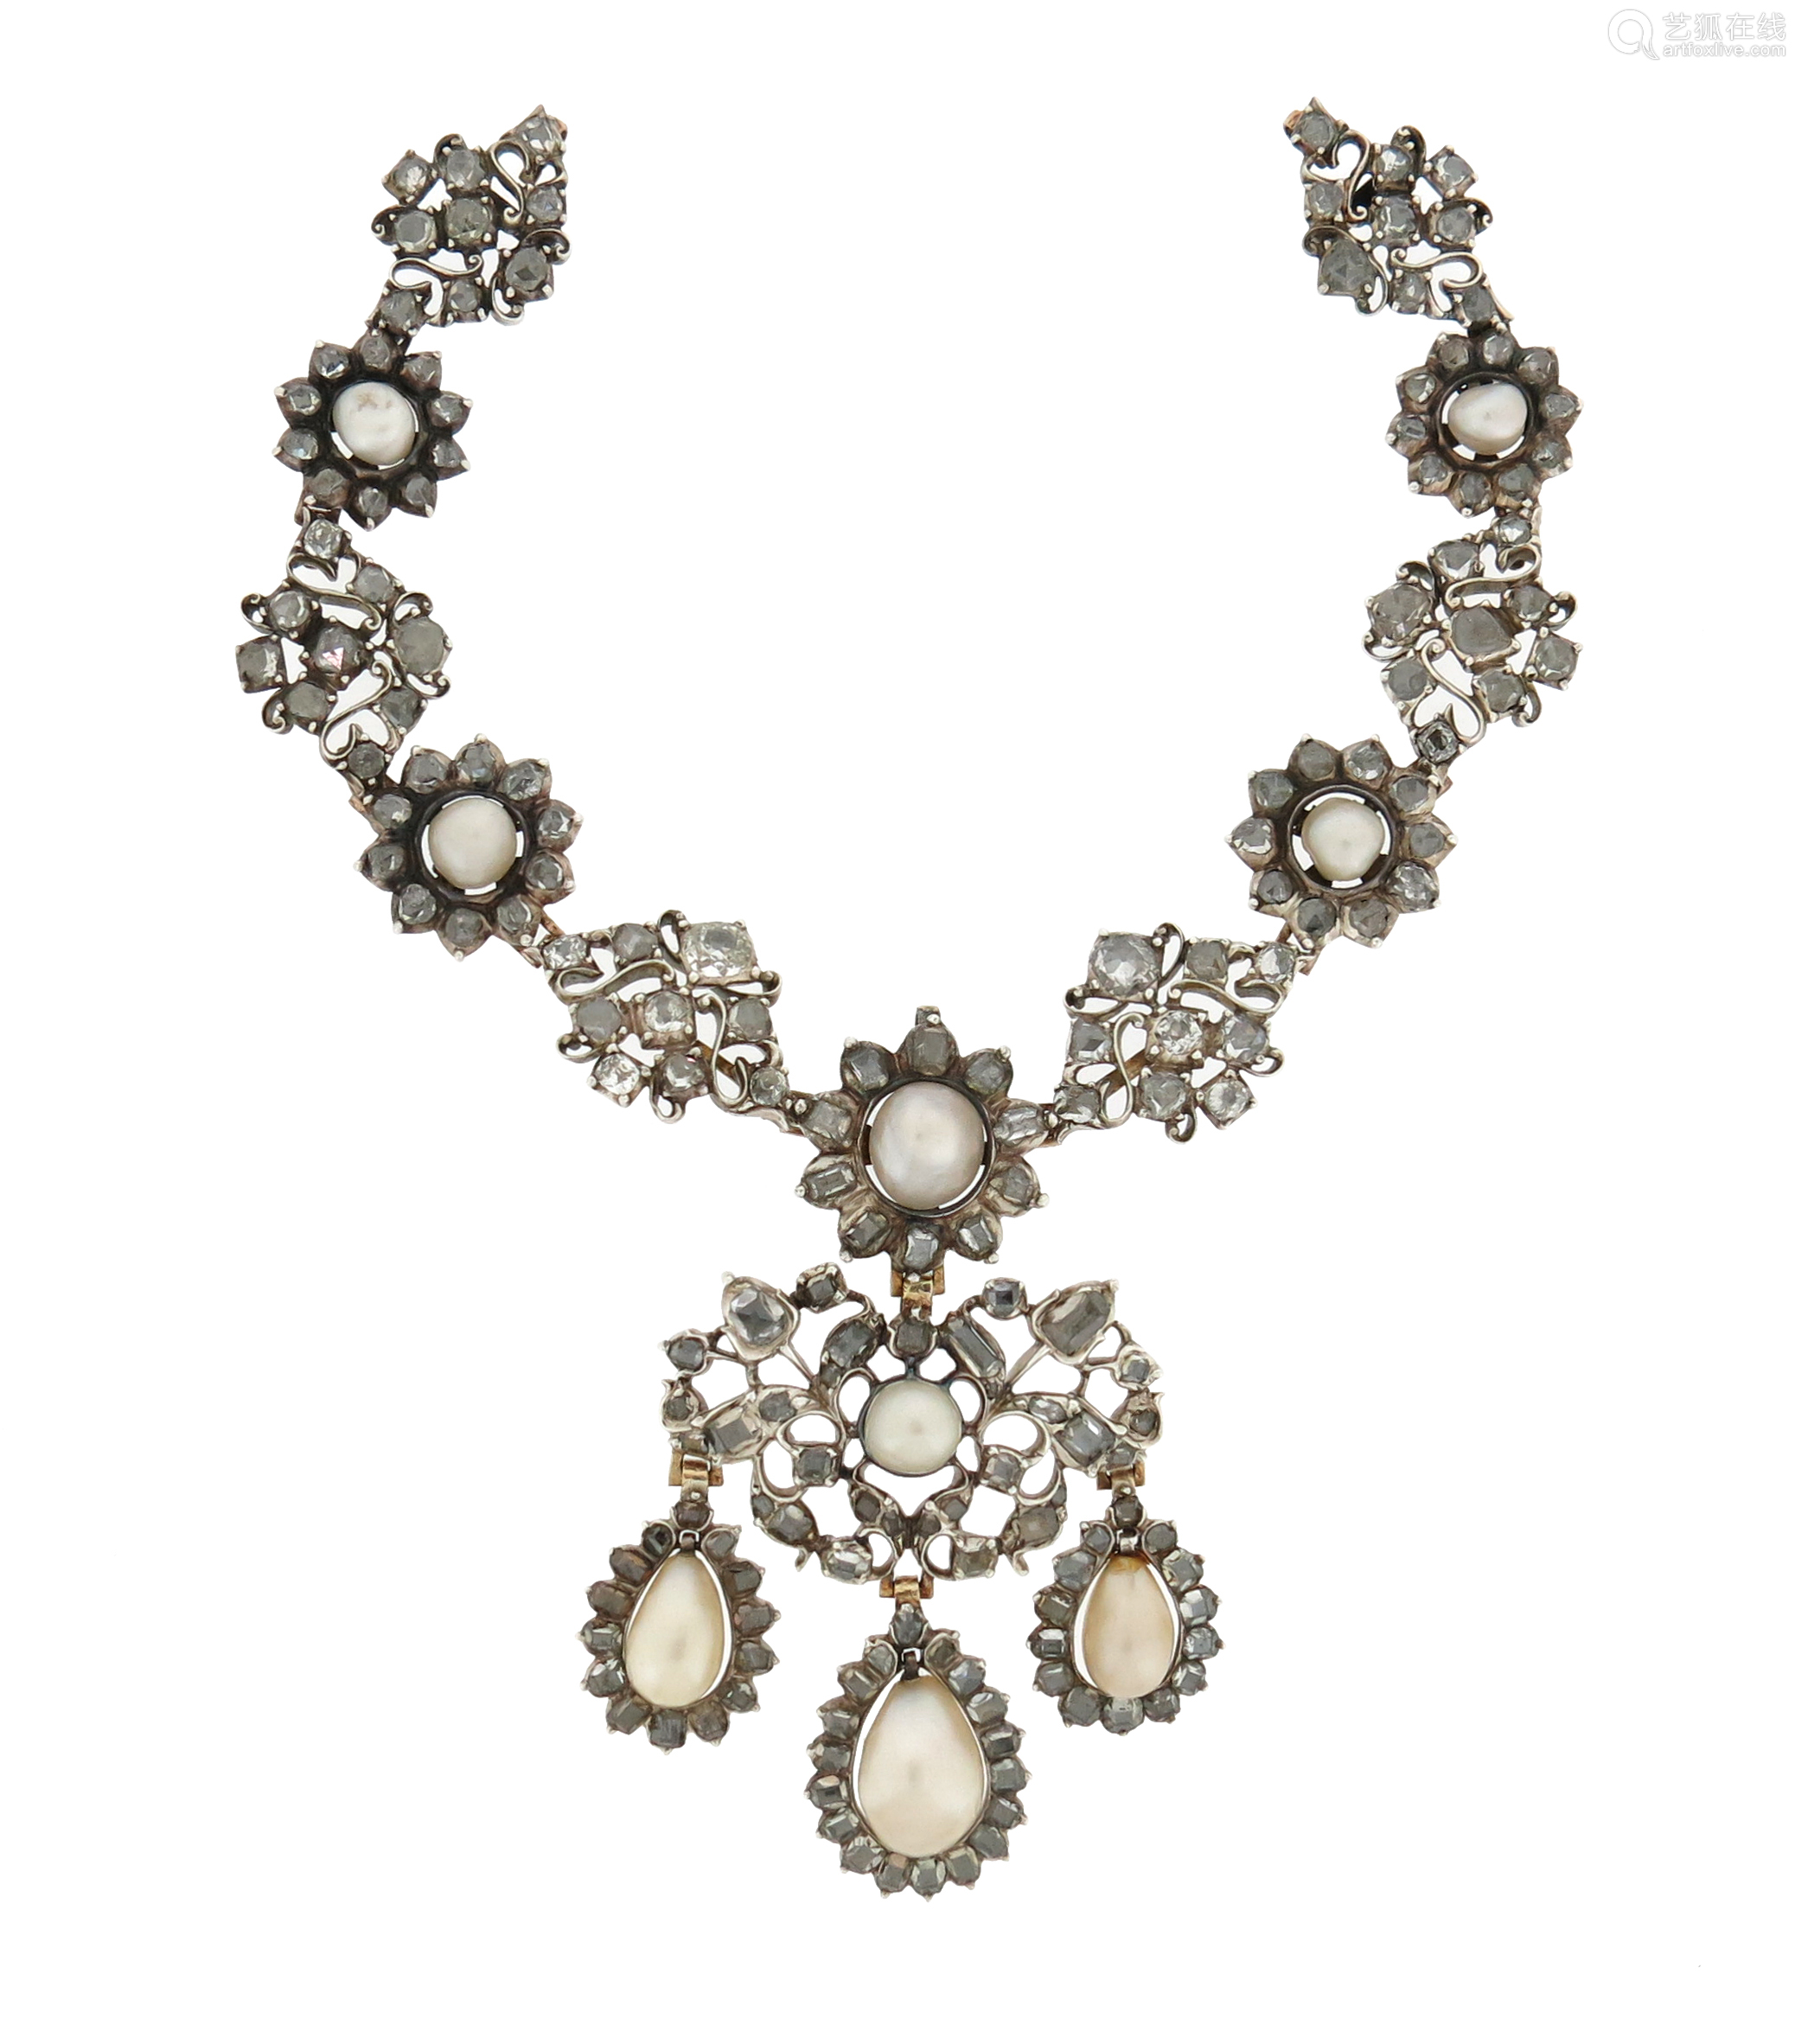 and diamond-set silver necklace front section and pendant, the